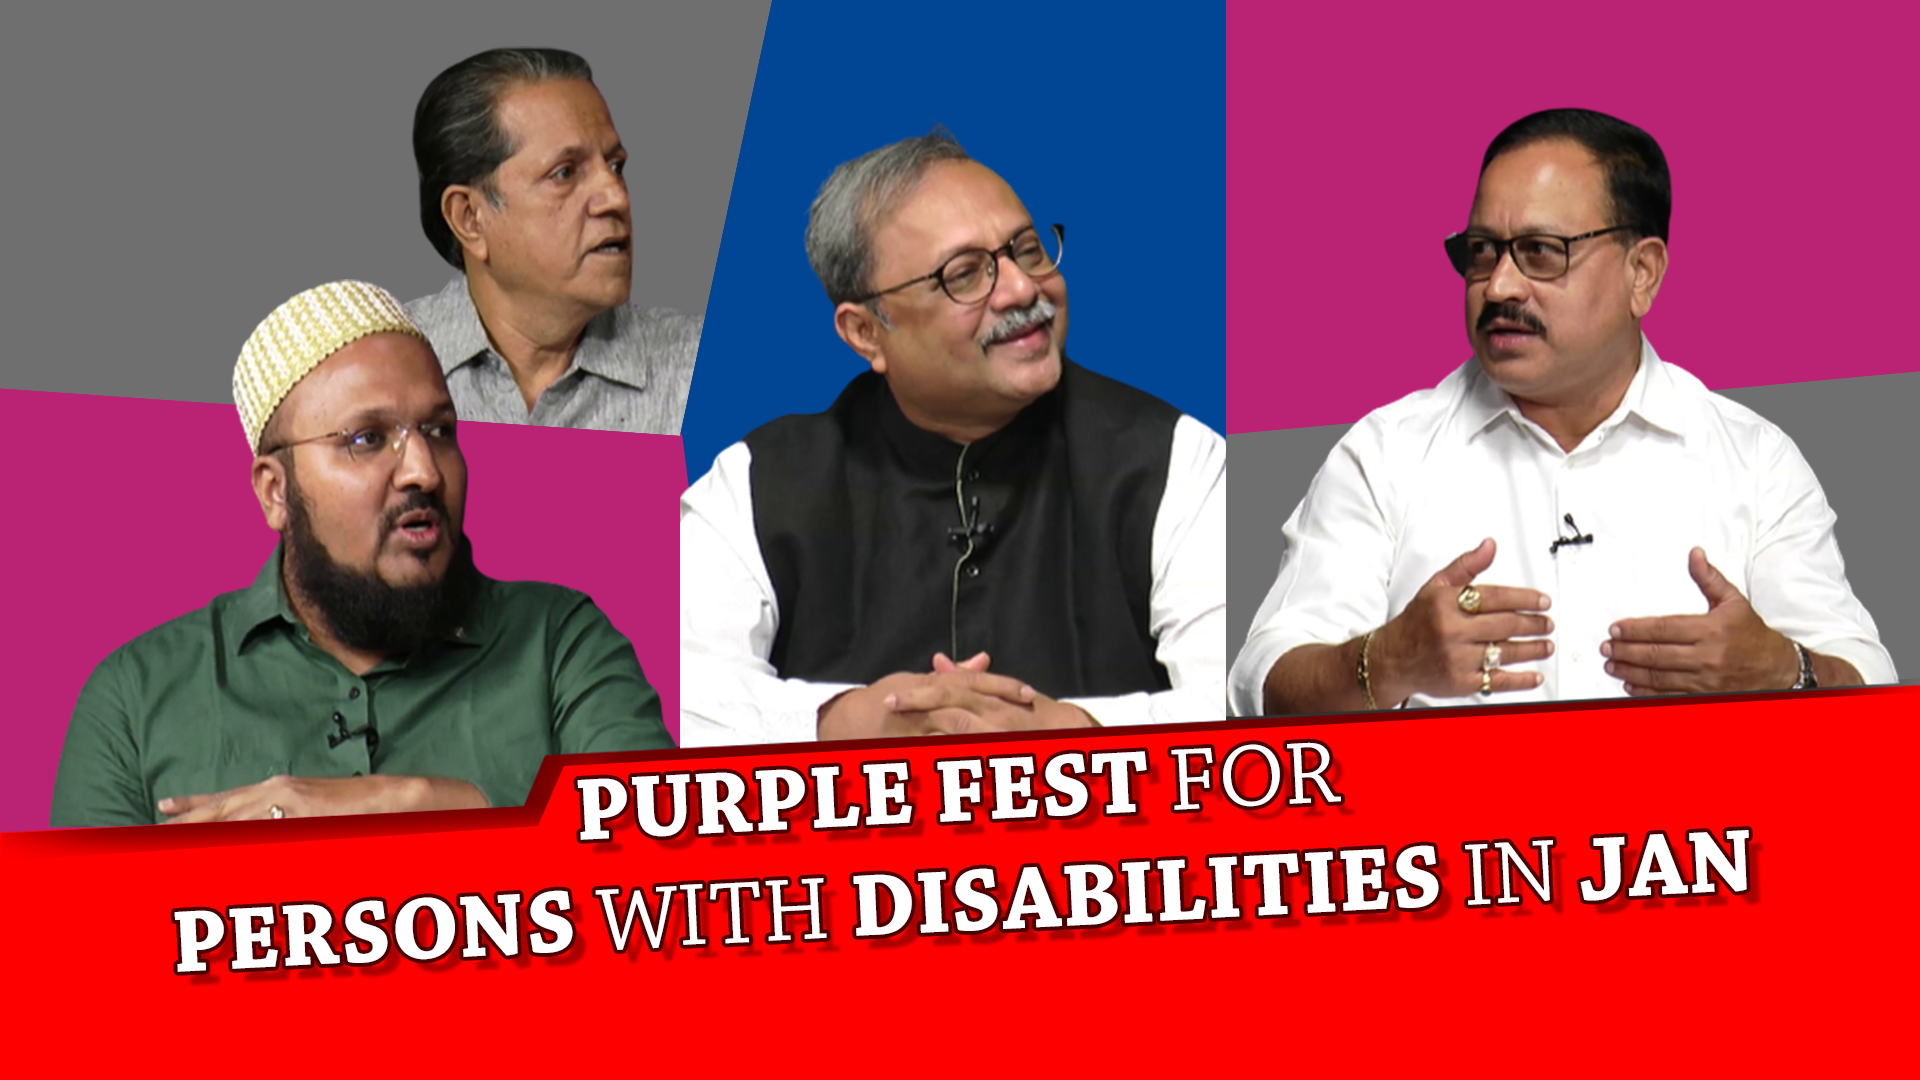 PURPLE FEST FOR PERSONS WITH DISABILITIES IN JAN